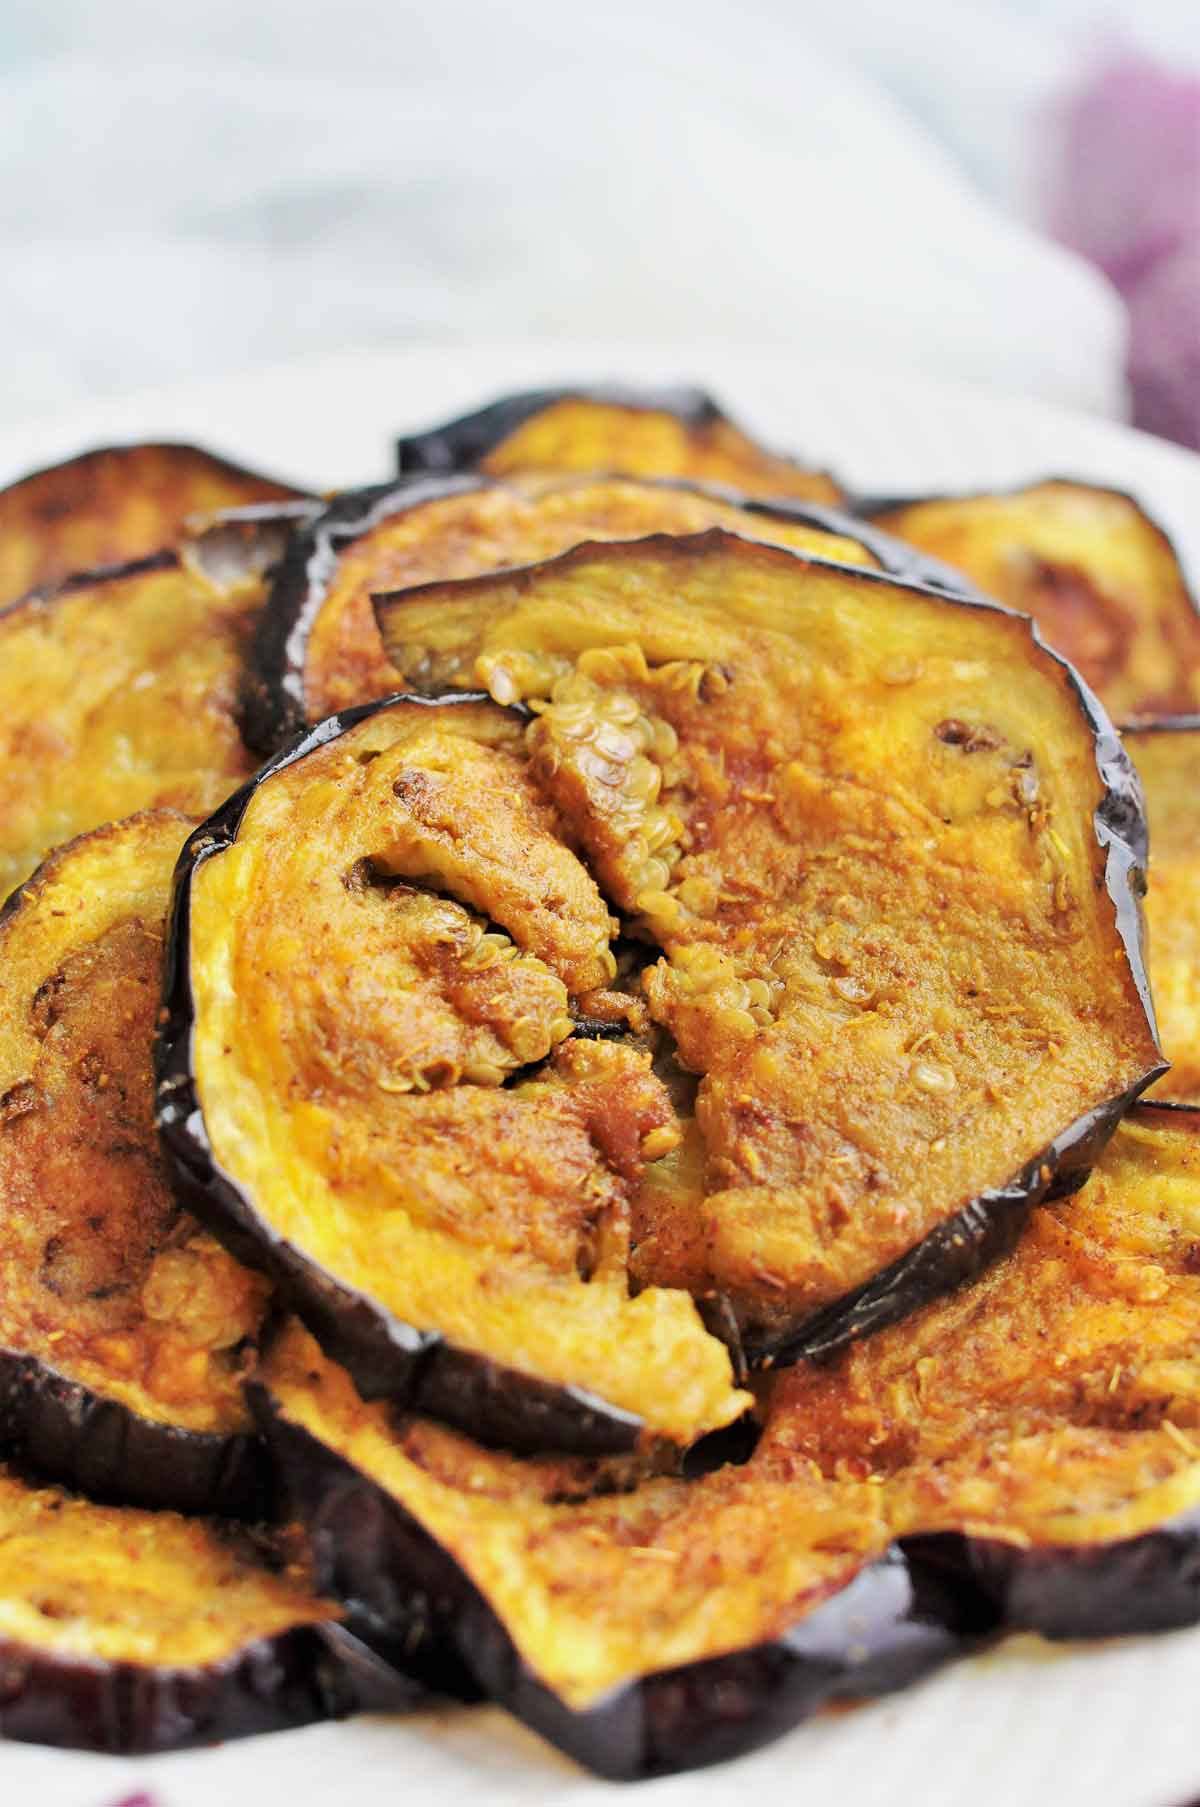 Roasted eggplant slices stacked in a serving plate.